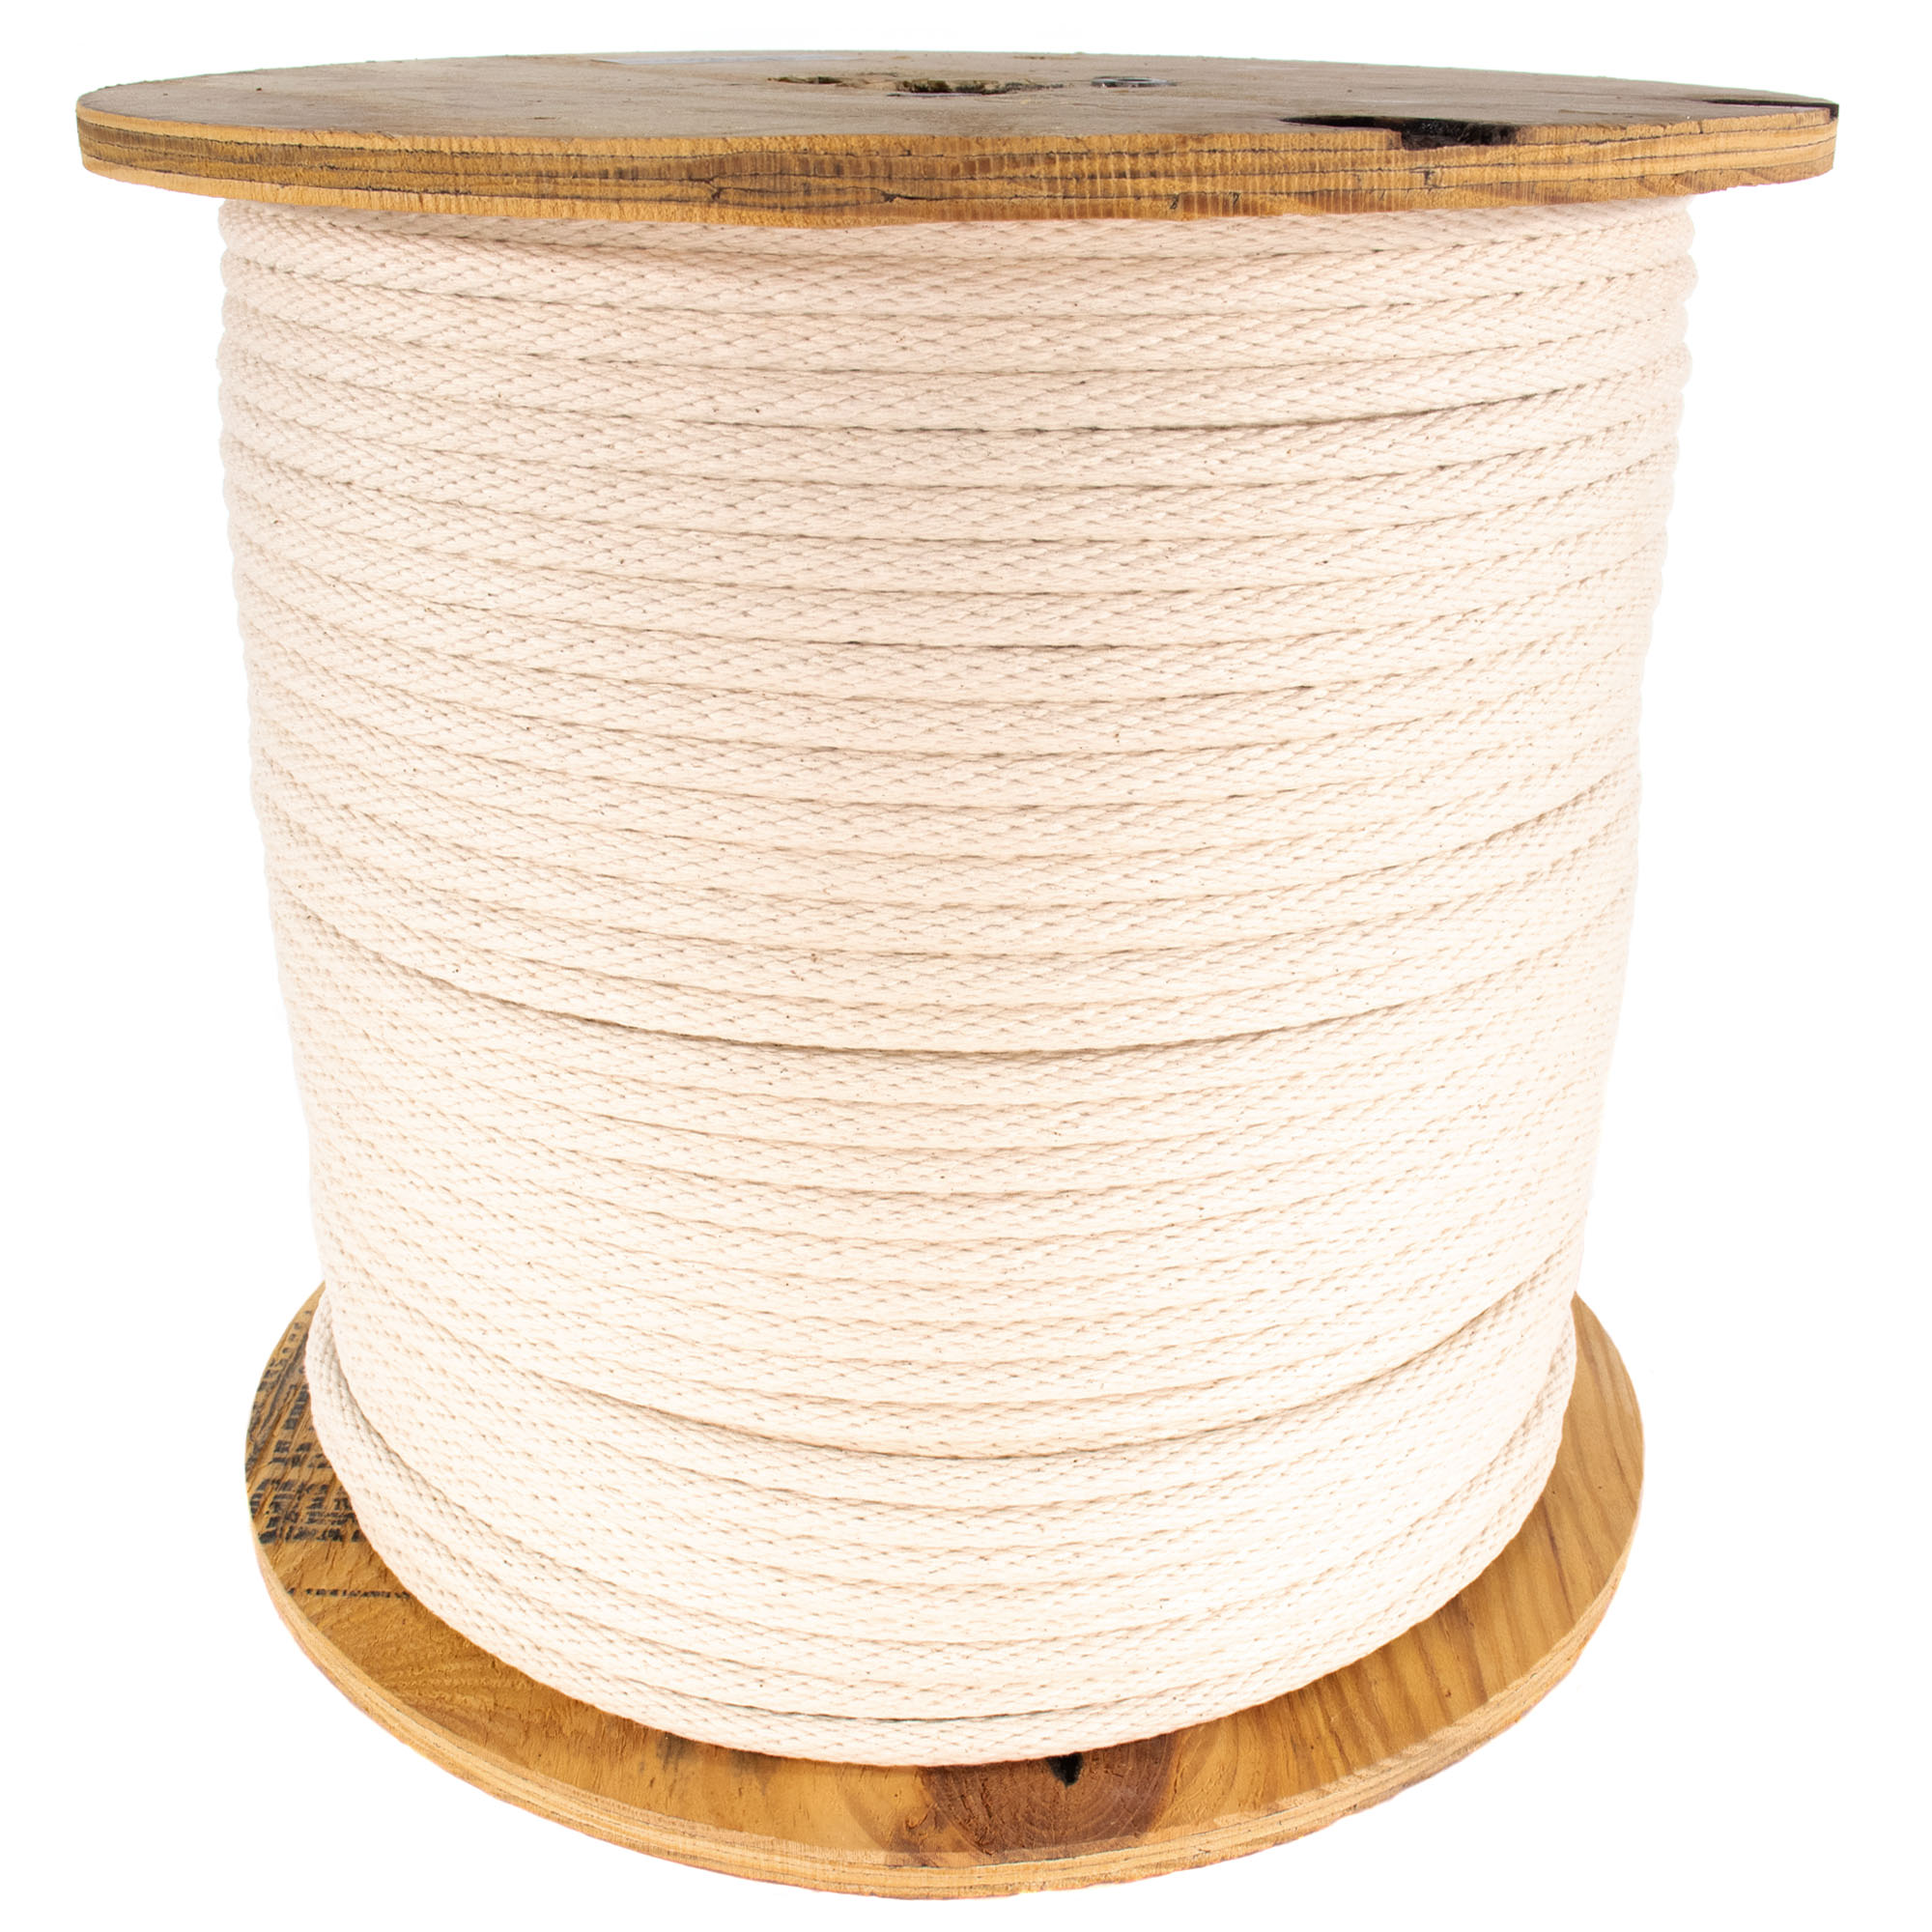 Paracord Planet Solid Braid Cotton Rope - 1/8, 3/16, 1/4, 3/8, & 1/2  Diameters - 10-1000 Foot Lengths - Cotton Weeping Cord